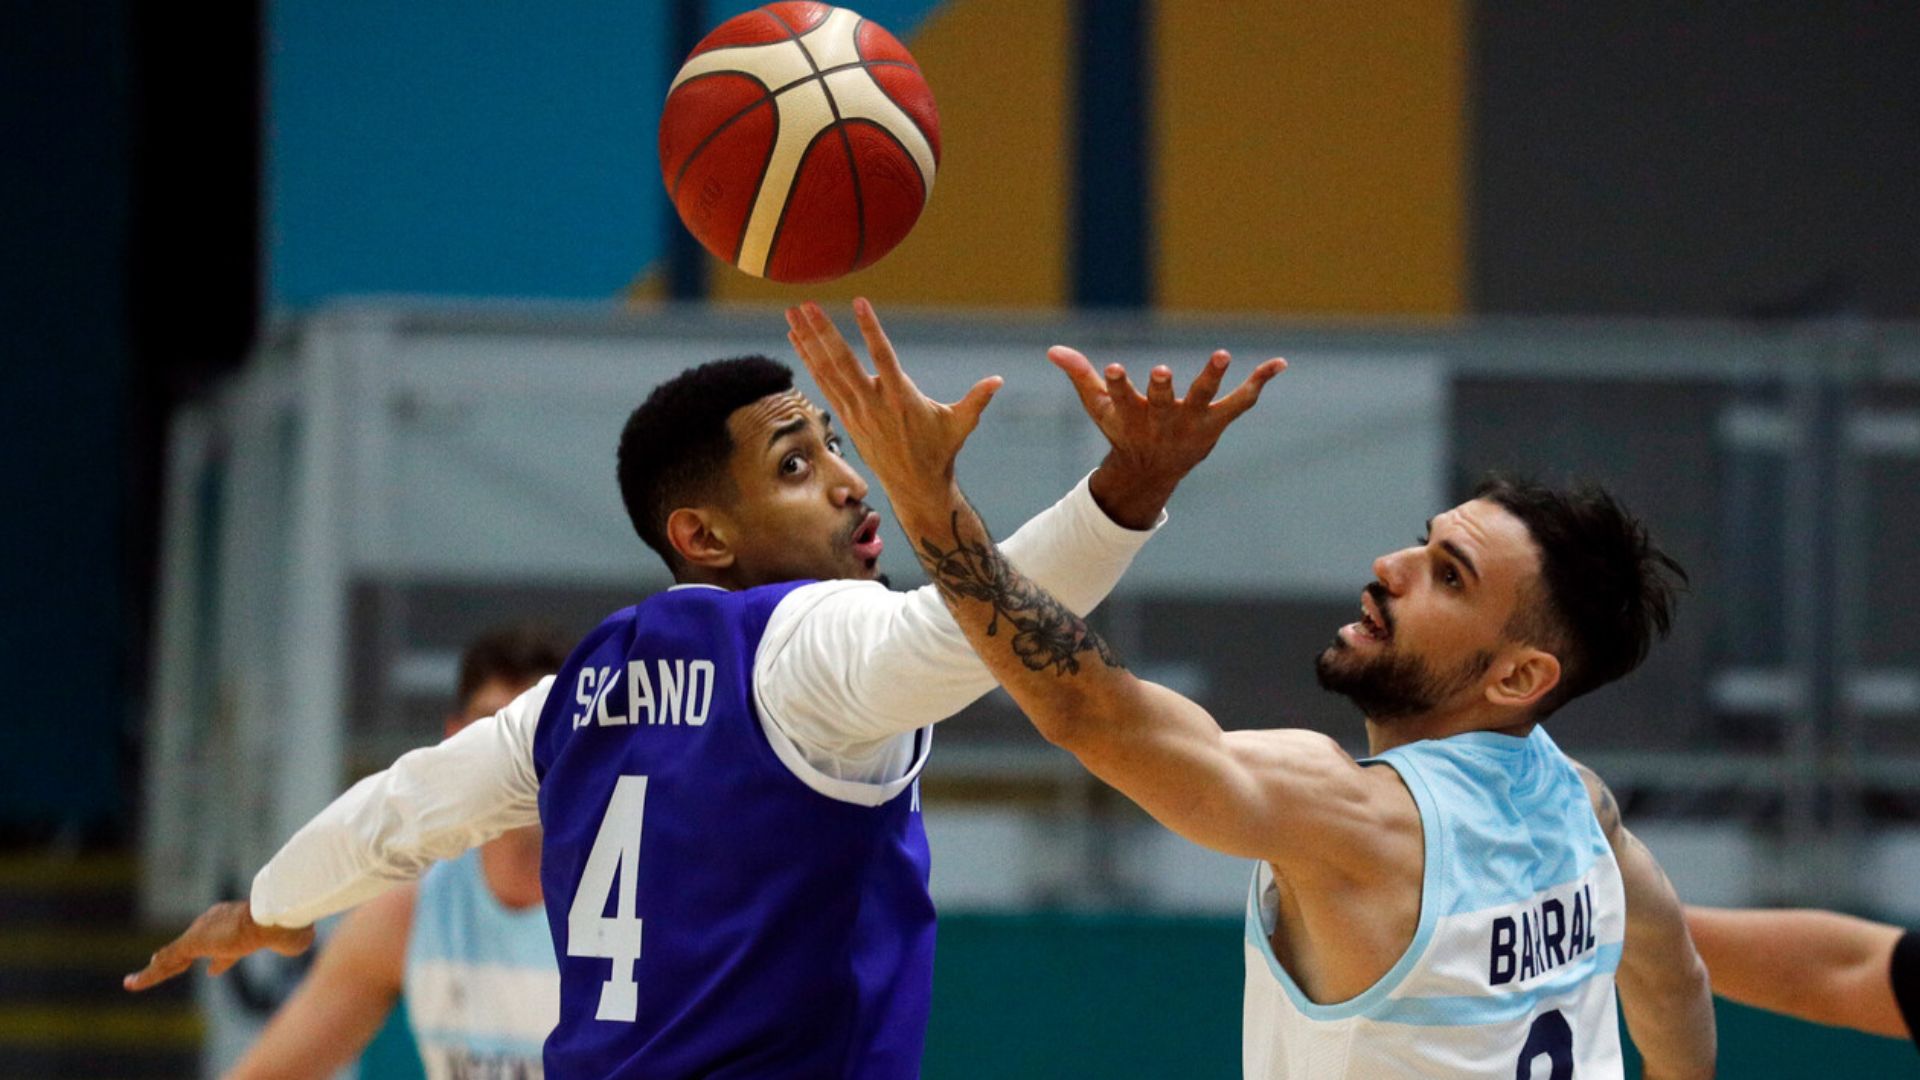 Male's Basketball: Argentina narrowly defeats Dominican Republic